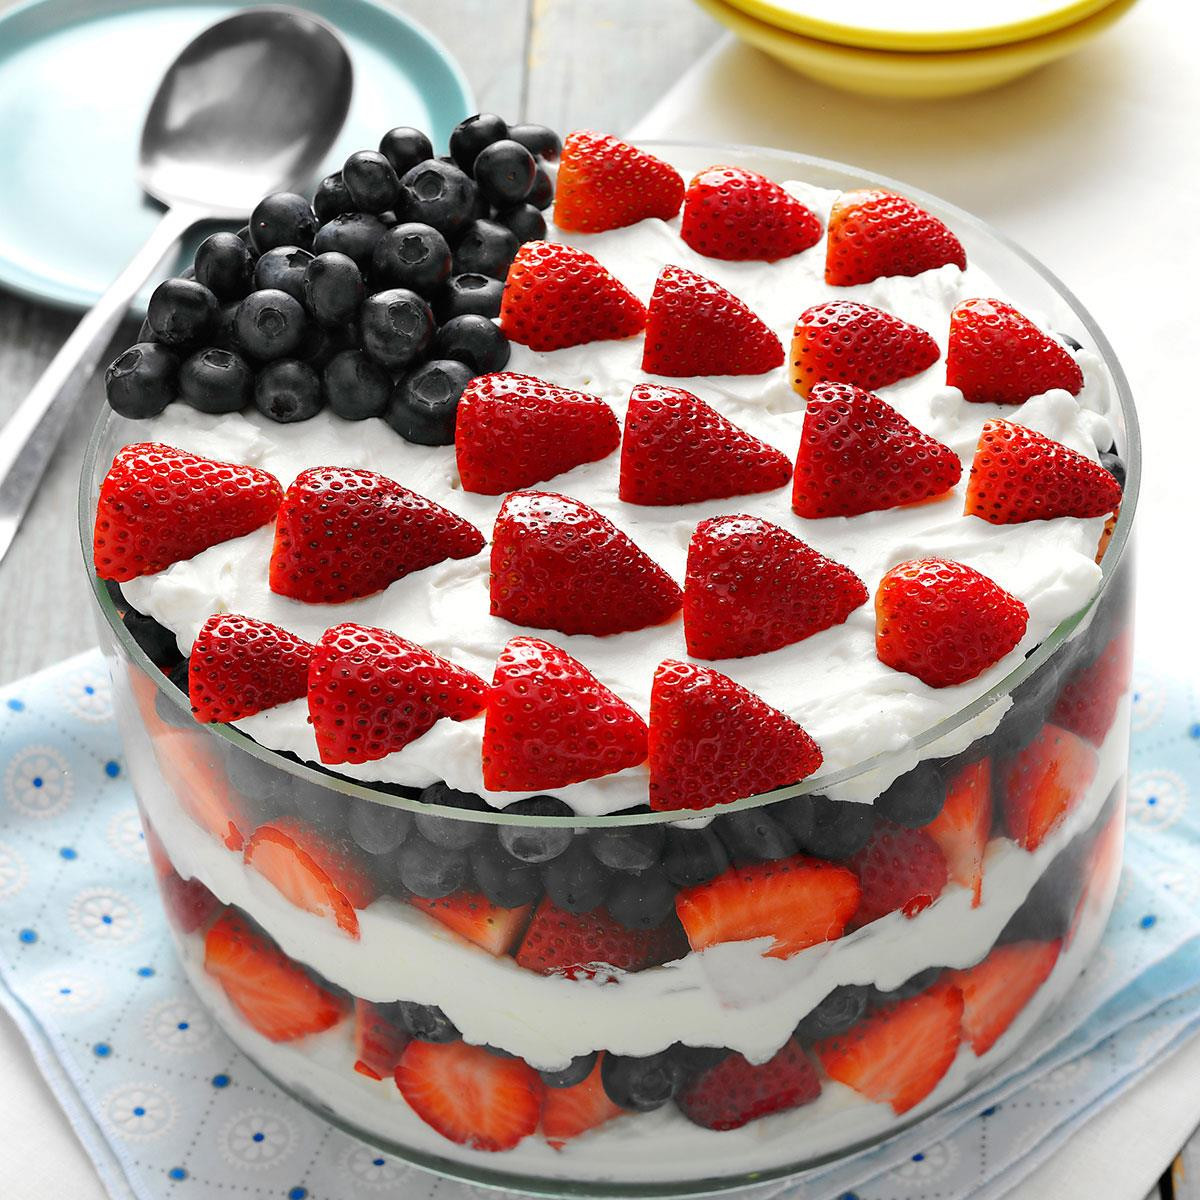 4Th Of July Fruit Desserts
 Red White and Blue Dessert Recipe